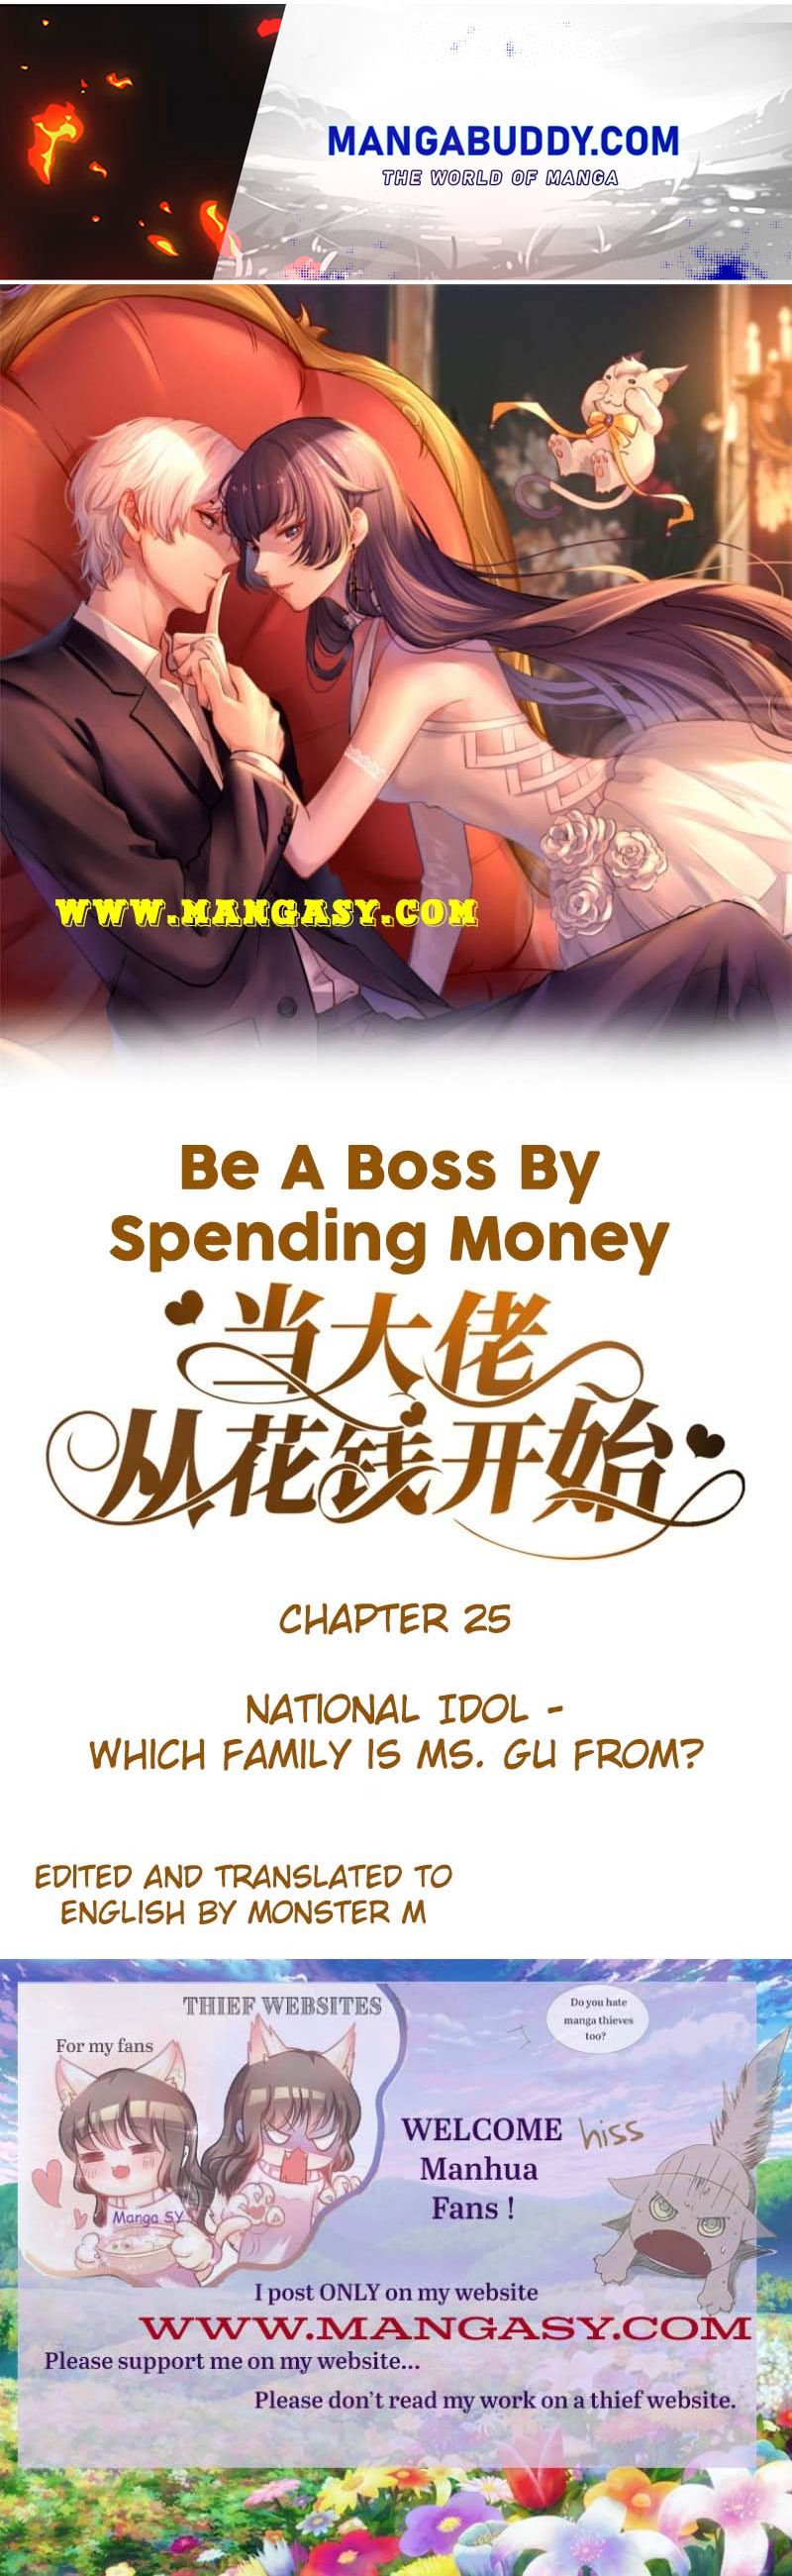 Becoming A Big Boss Starts With Spending Money - Page 1